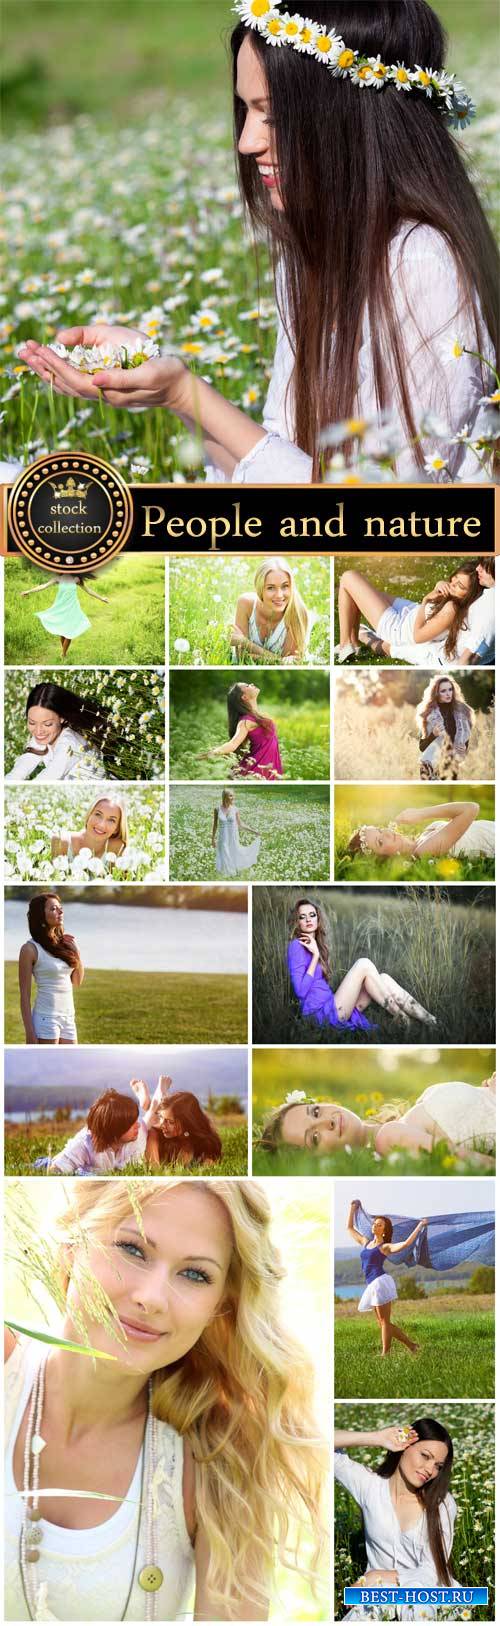 People and nature, women - stock photos